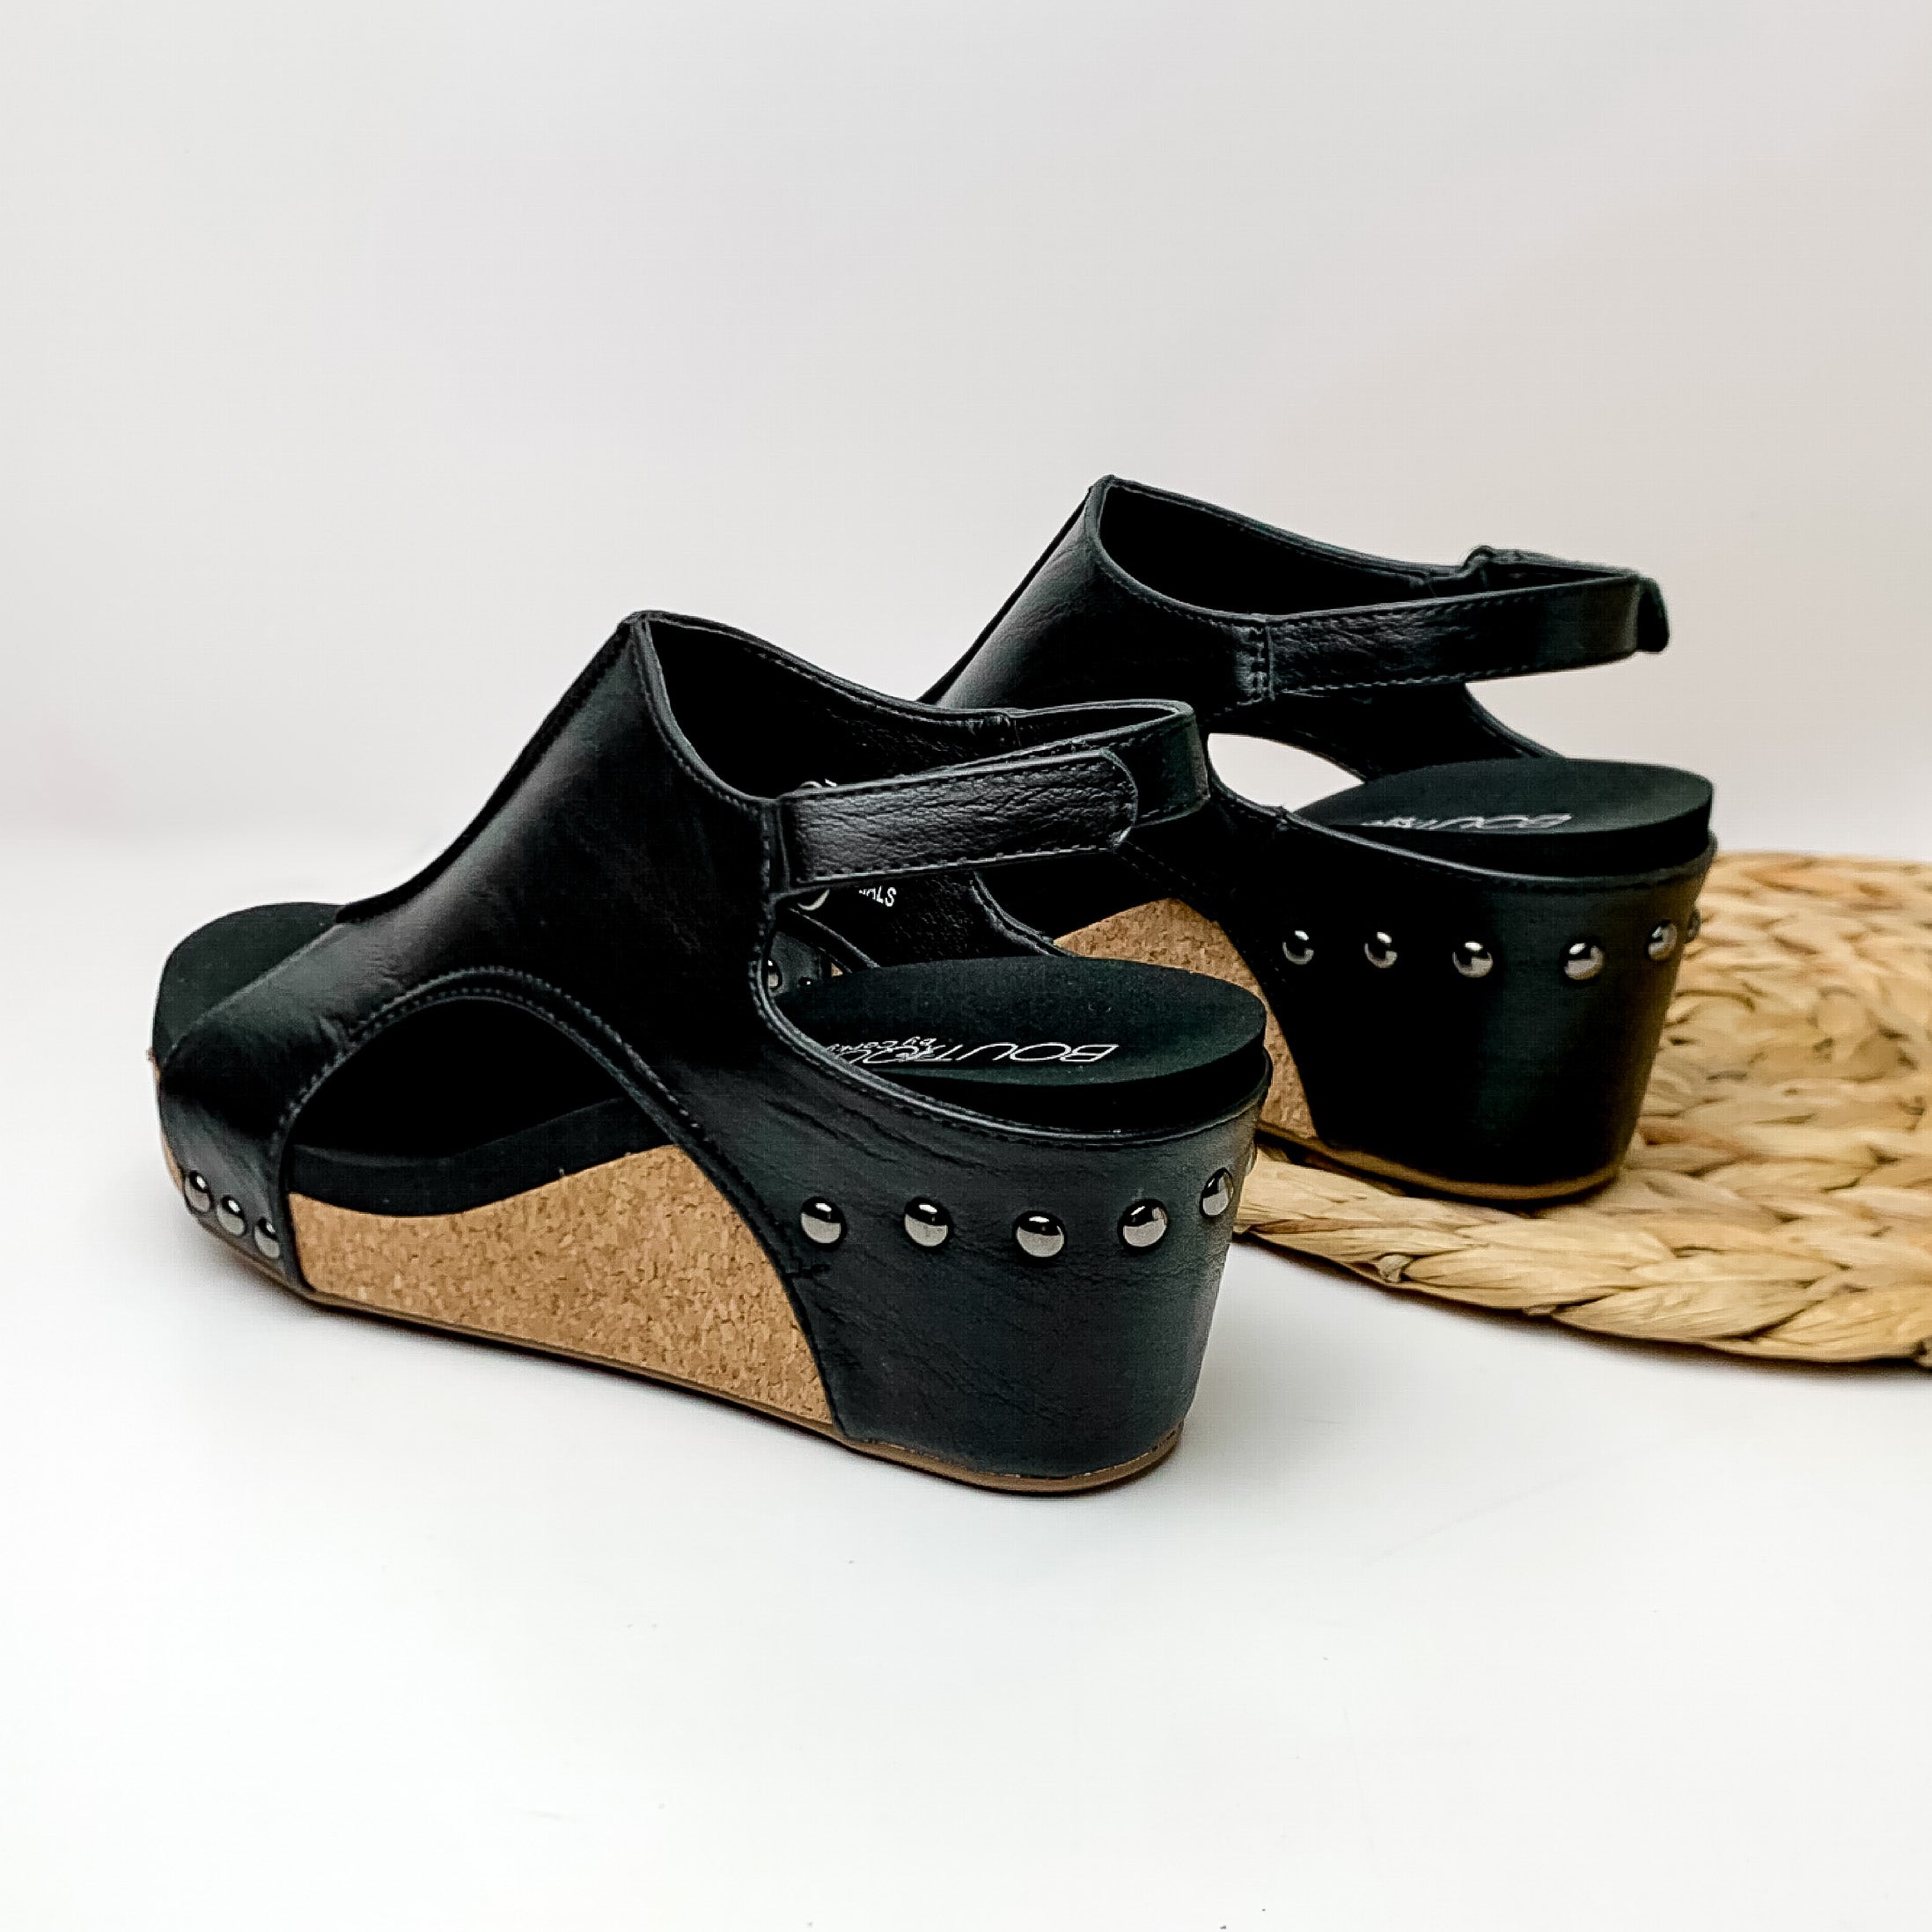 Corky's | Carley Wedge Sandals with Velcro Straps in Black - Giddy Up Glamour Boutique